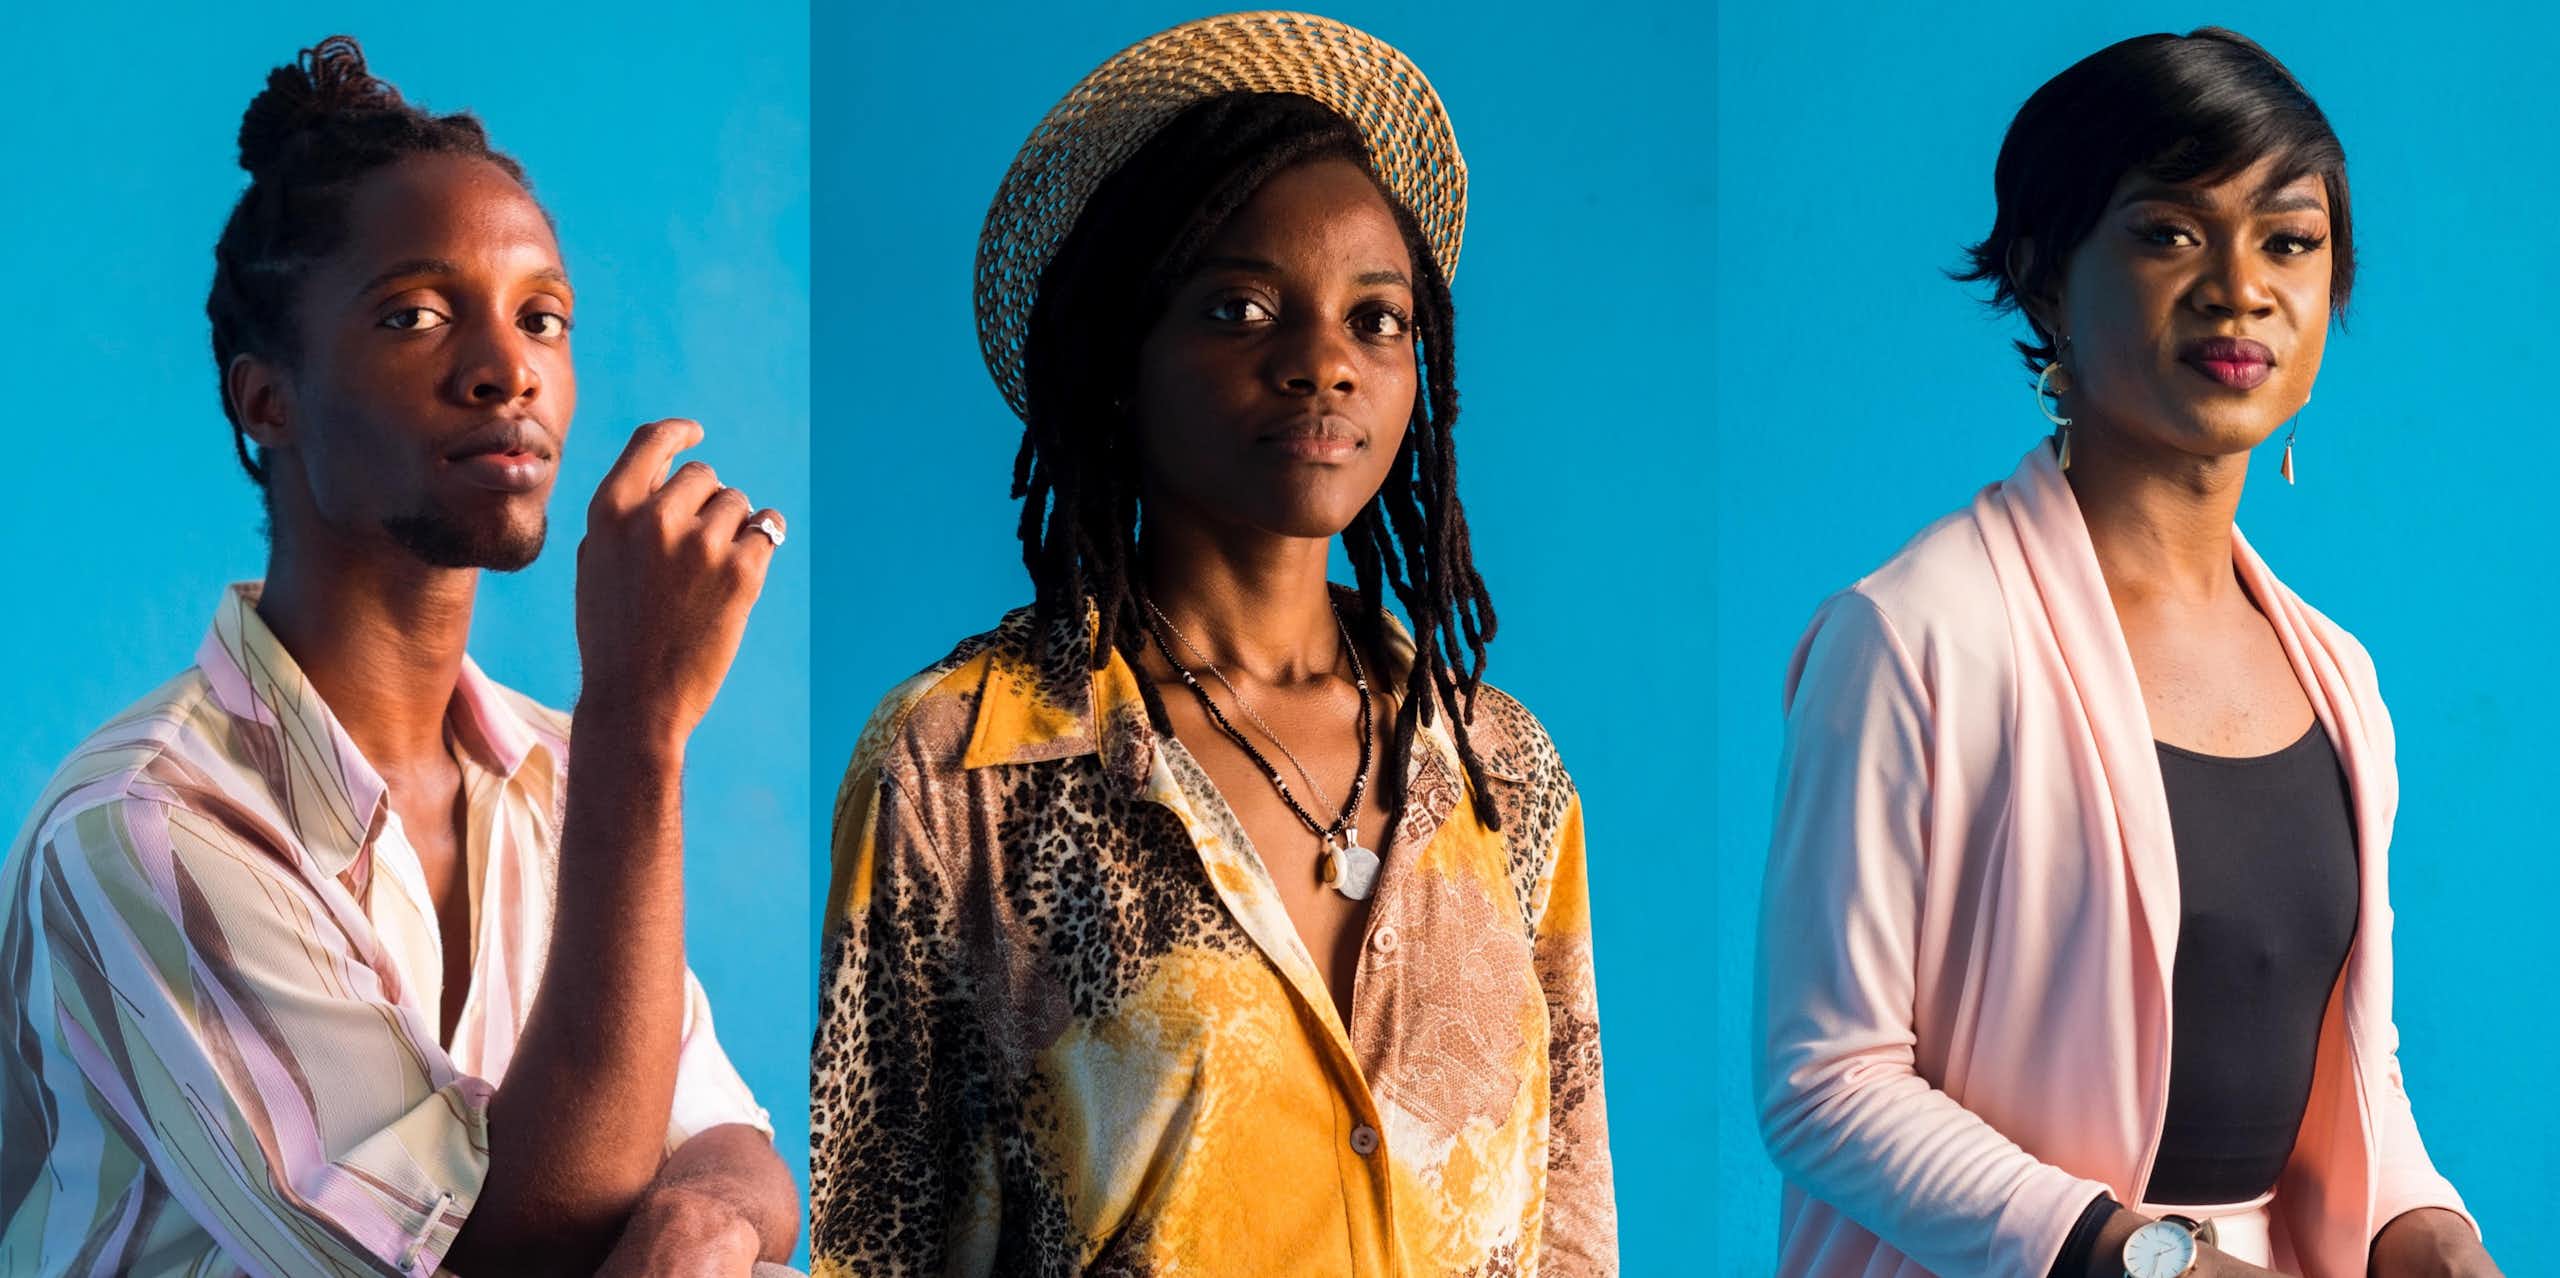 Photographs of three young Africans against a blue backdrop, slight smiles on their lips and proud postures.